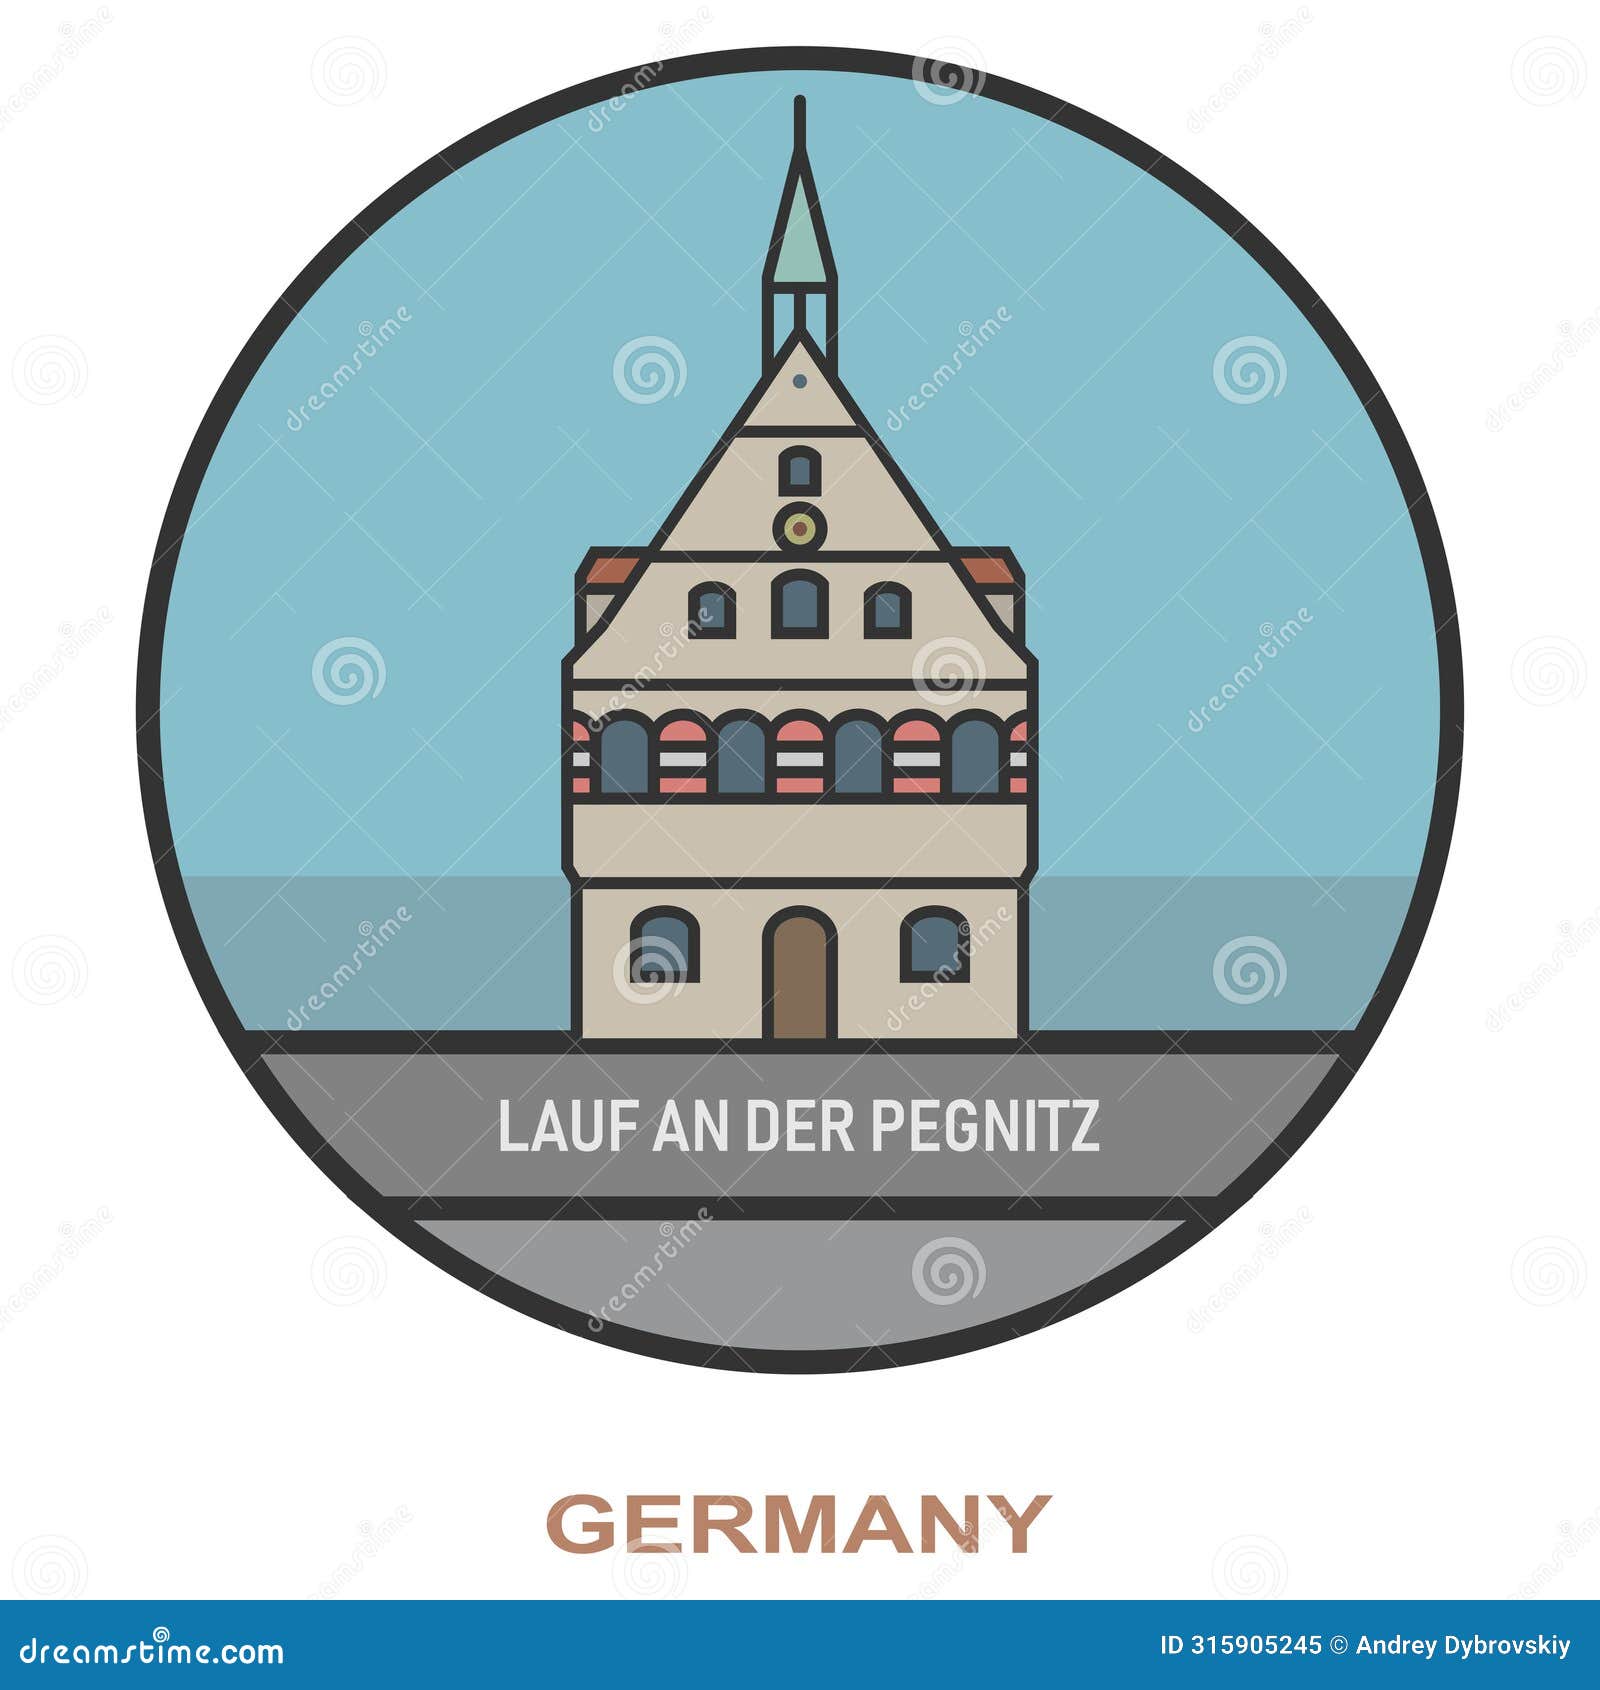 lauf an der pegnitz. cities and towns in germany